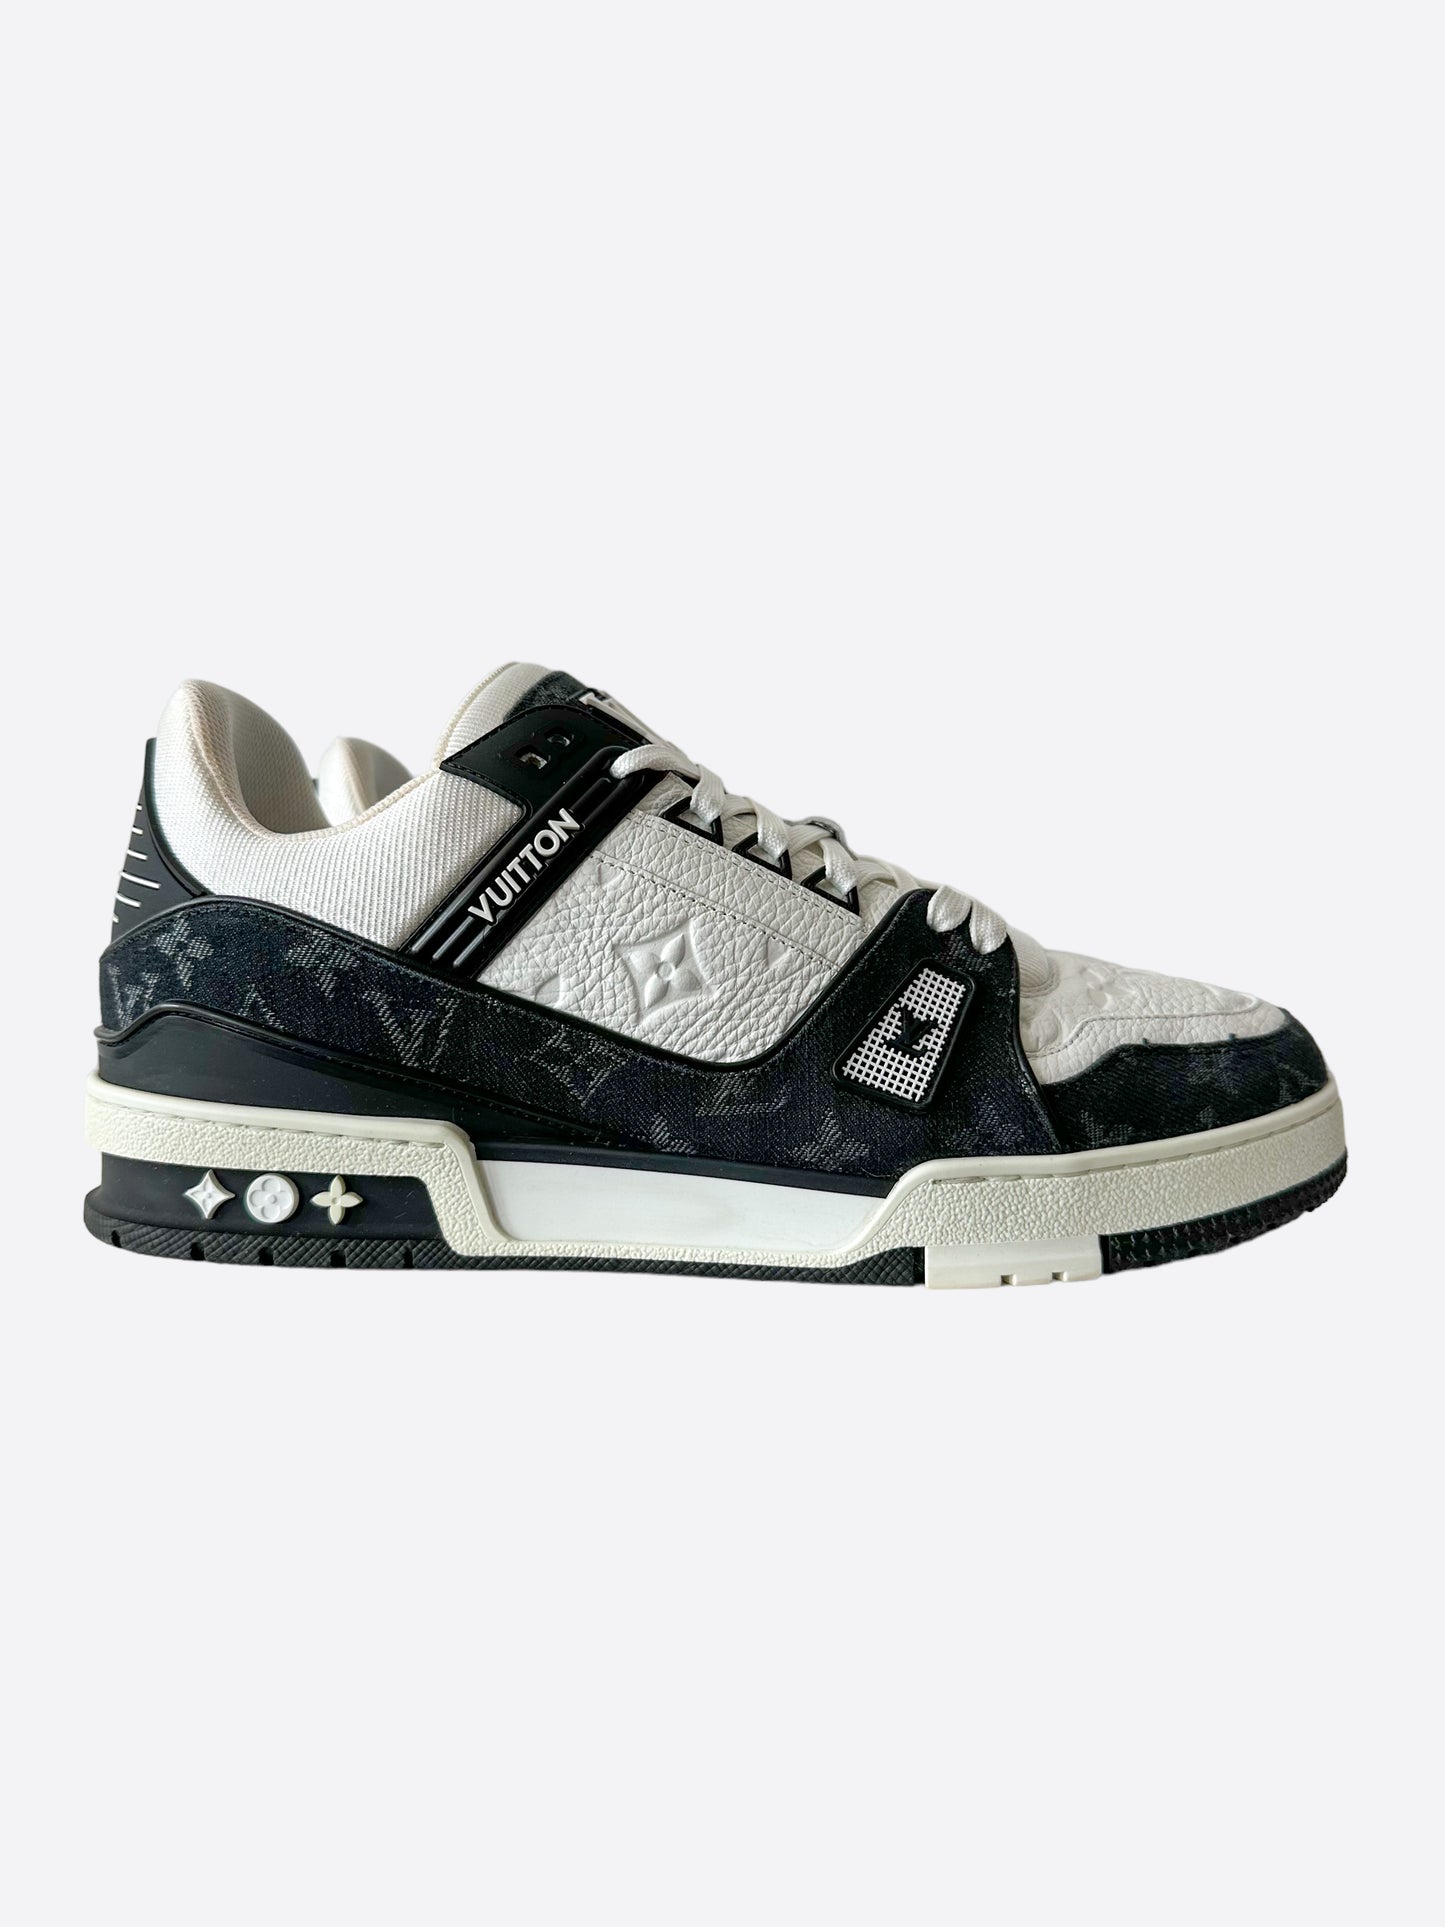 LV Trainer leather high trainers